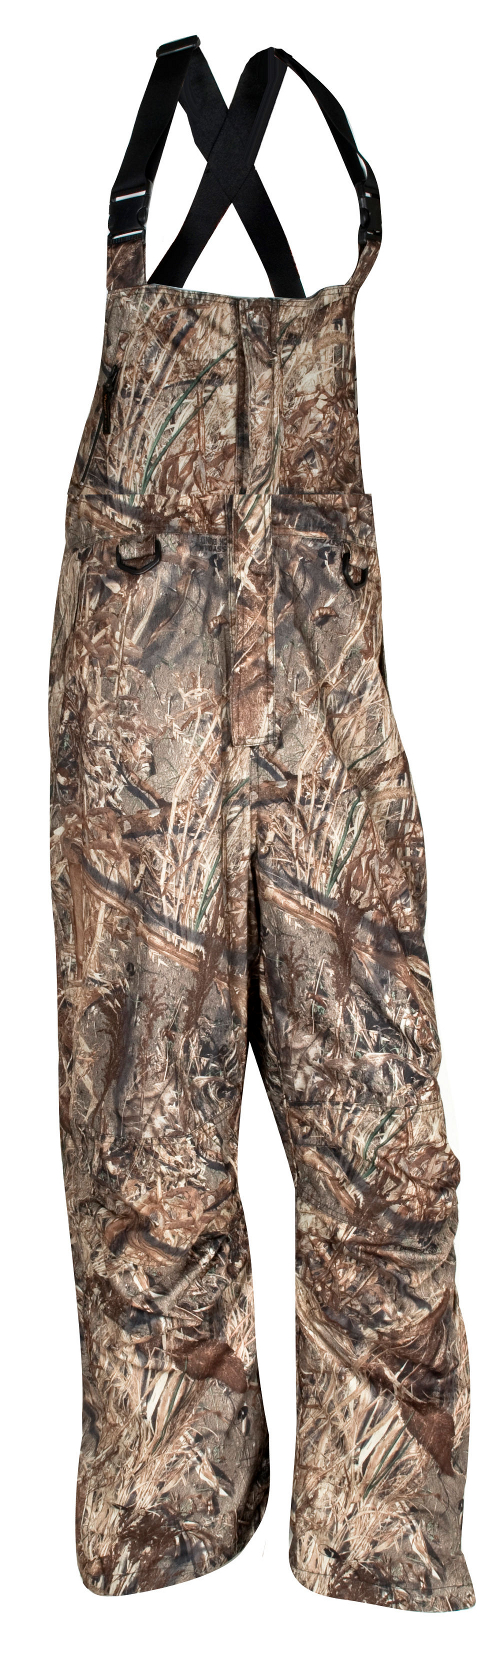 Bib Overall Duck Blind - Large